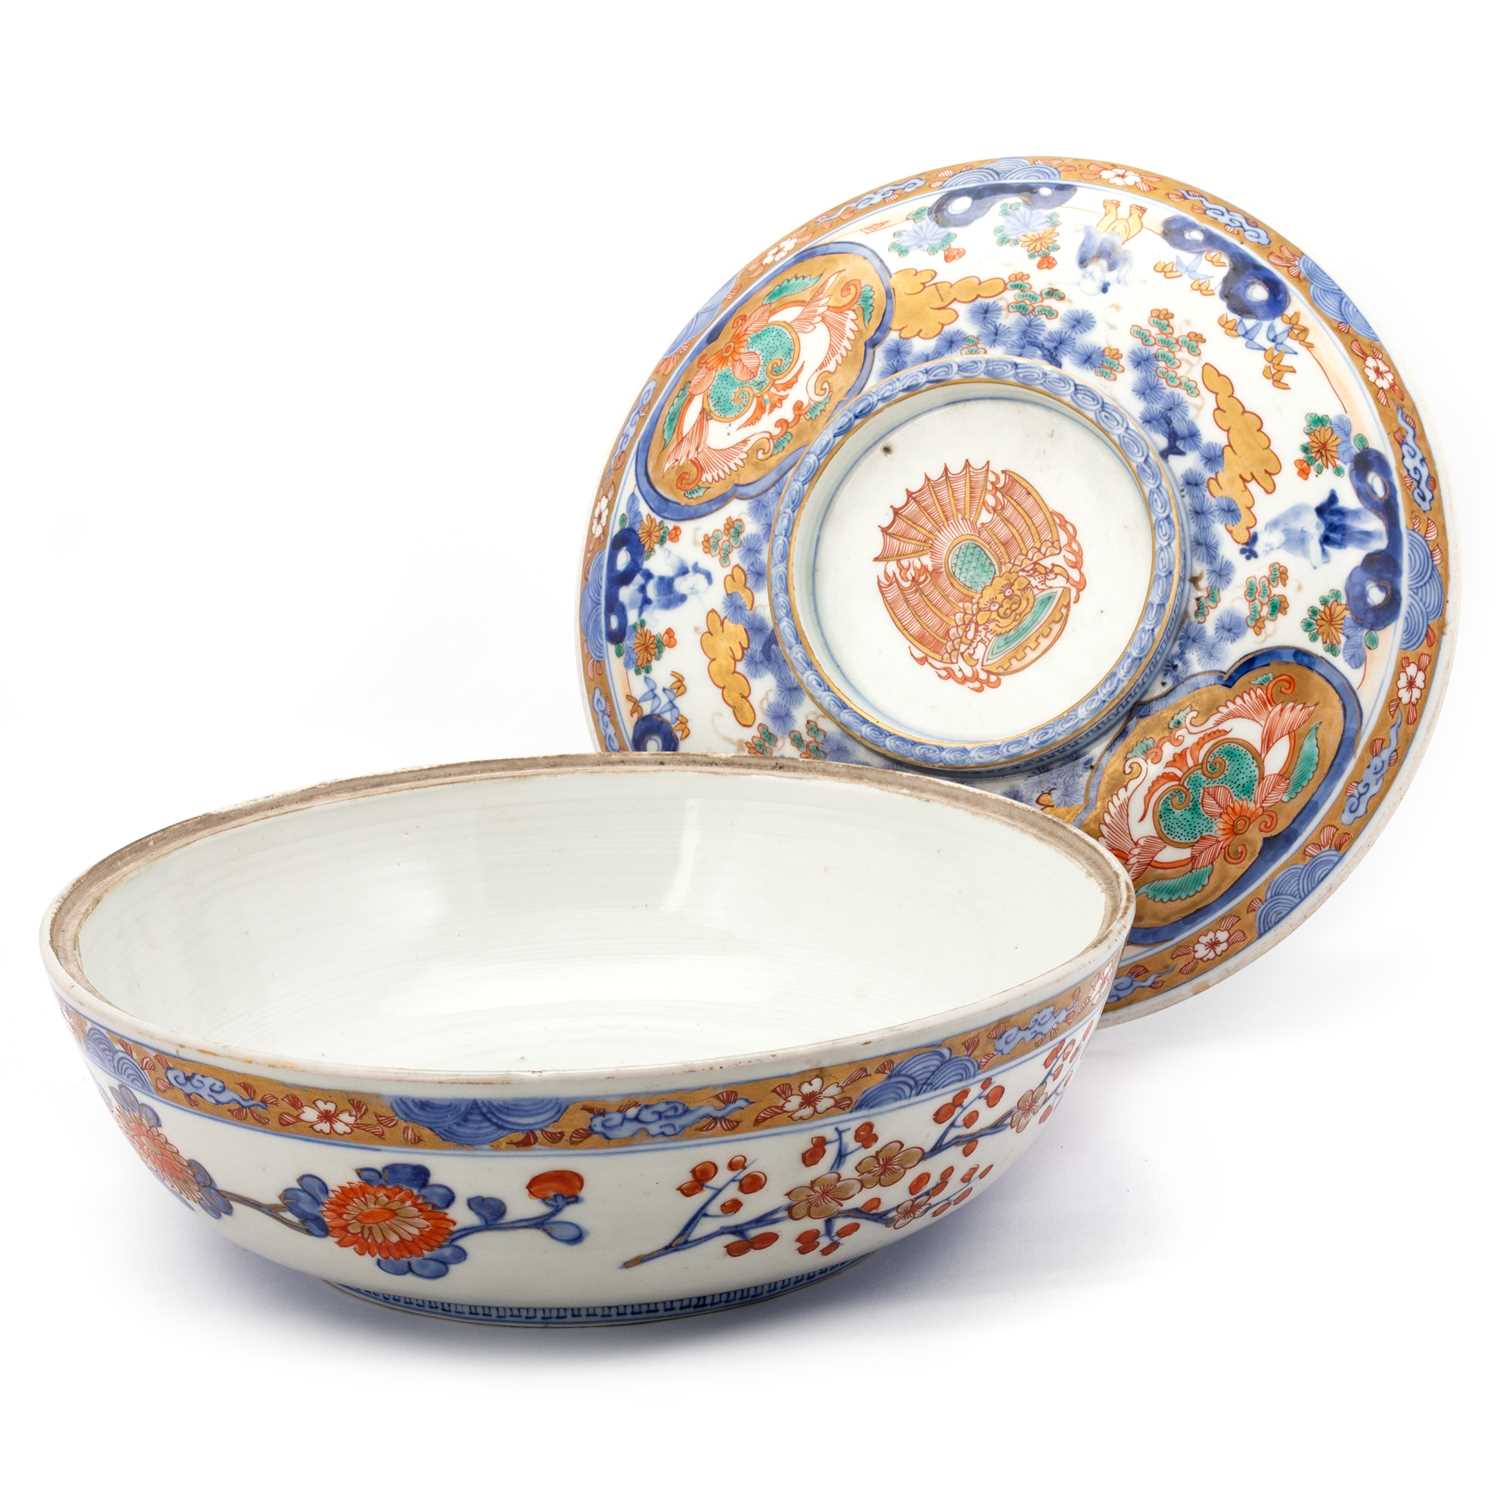 A JAPANESE IMARI BOWL AND COVER, 19TH CENTURY - Image 2 of 2